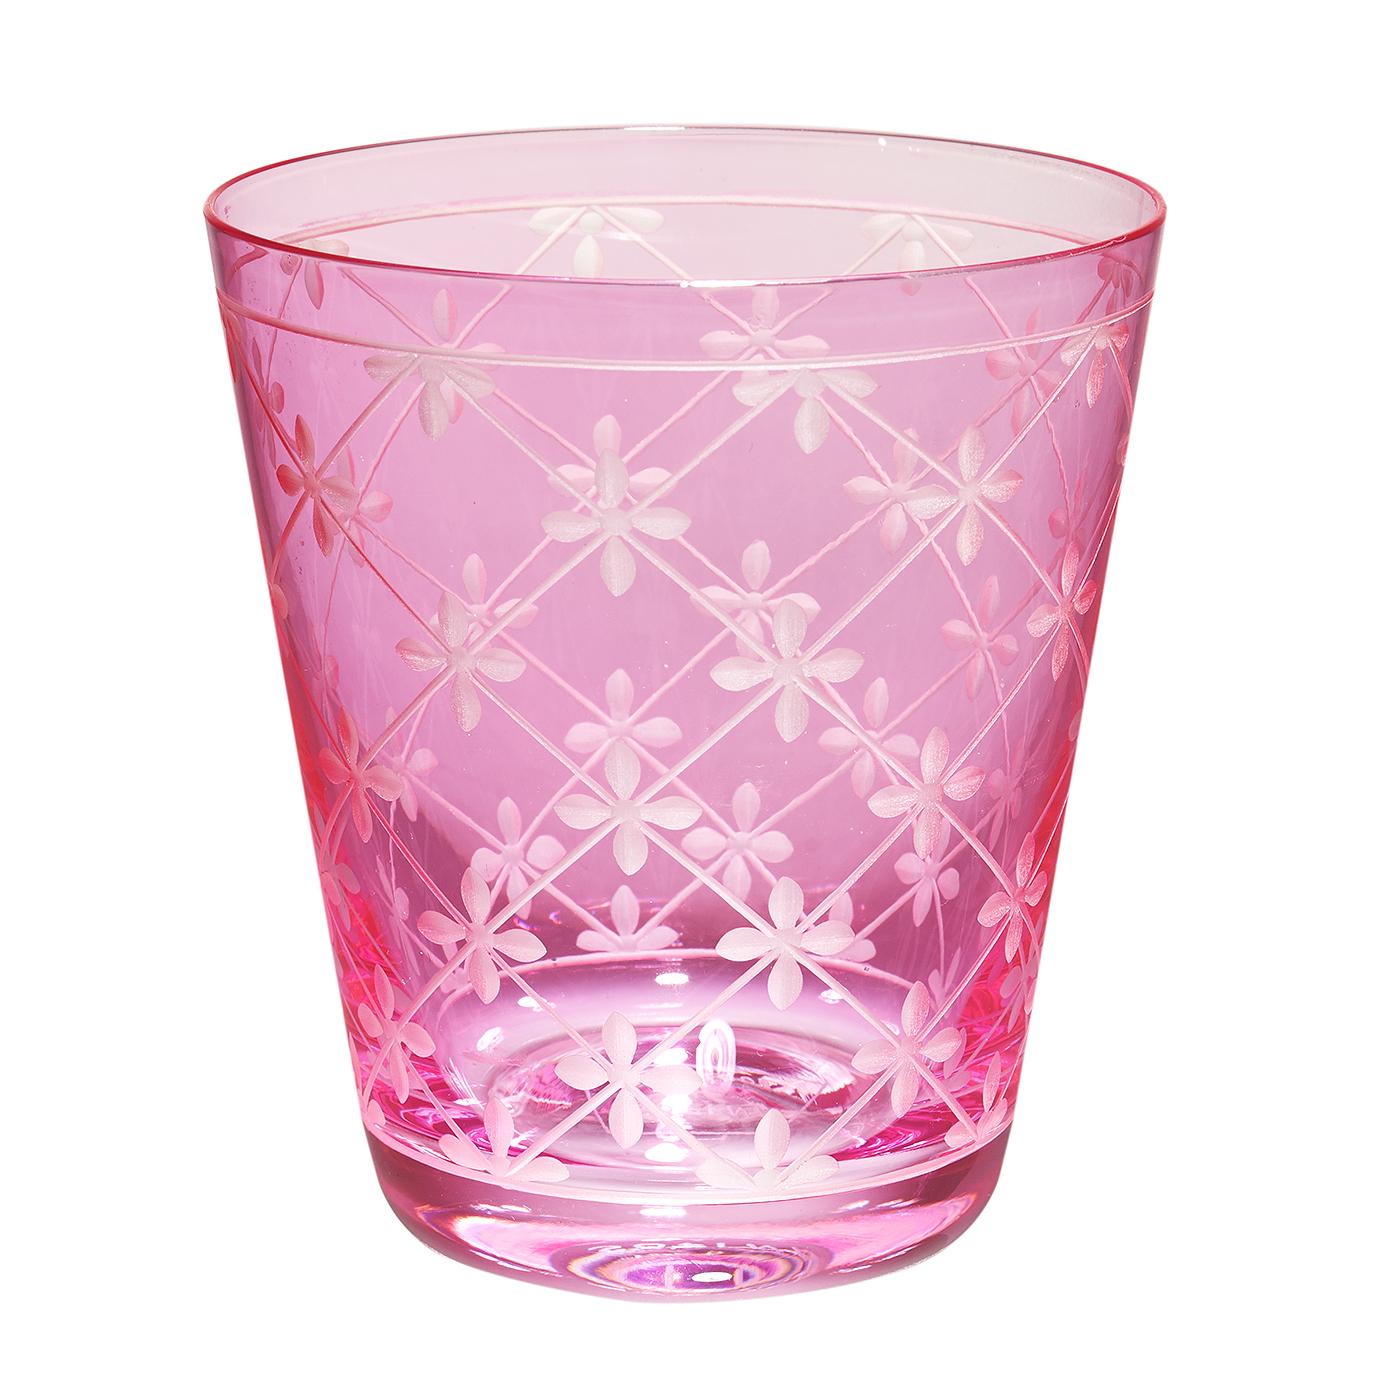 Set of four tumbler hand blown crystal. The glasses are hand-engraved with a modern decor all around. The glasses come in six charming colors yellow, turquoise, blue, rose, green and purple. The set can be ordered in different colors or all six in